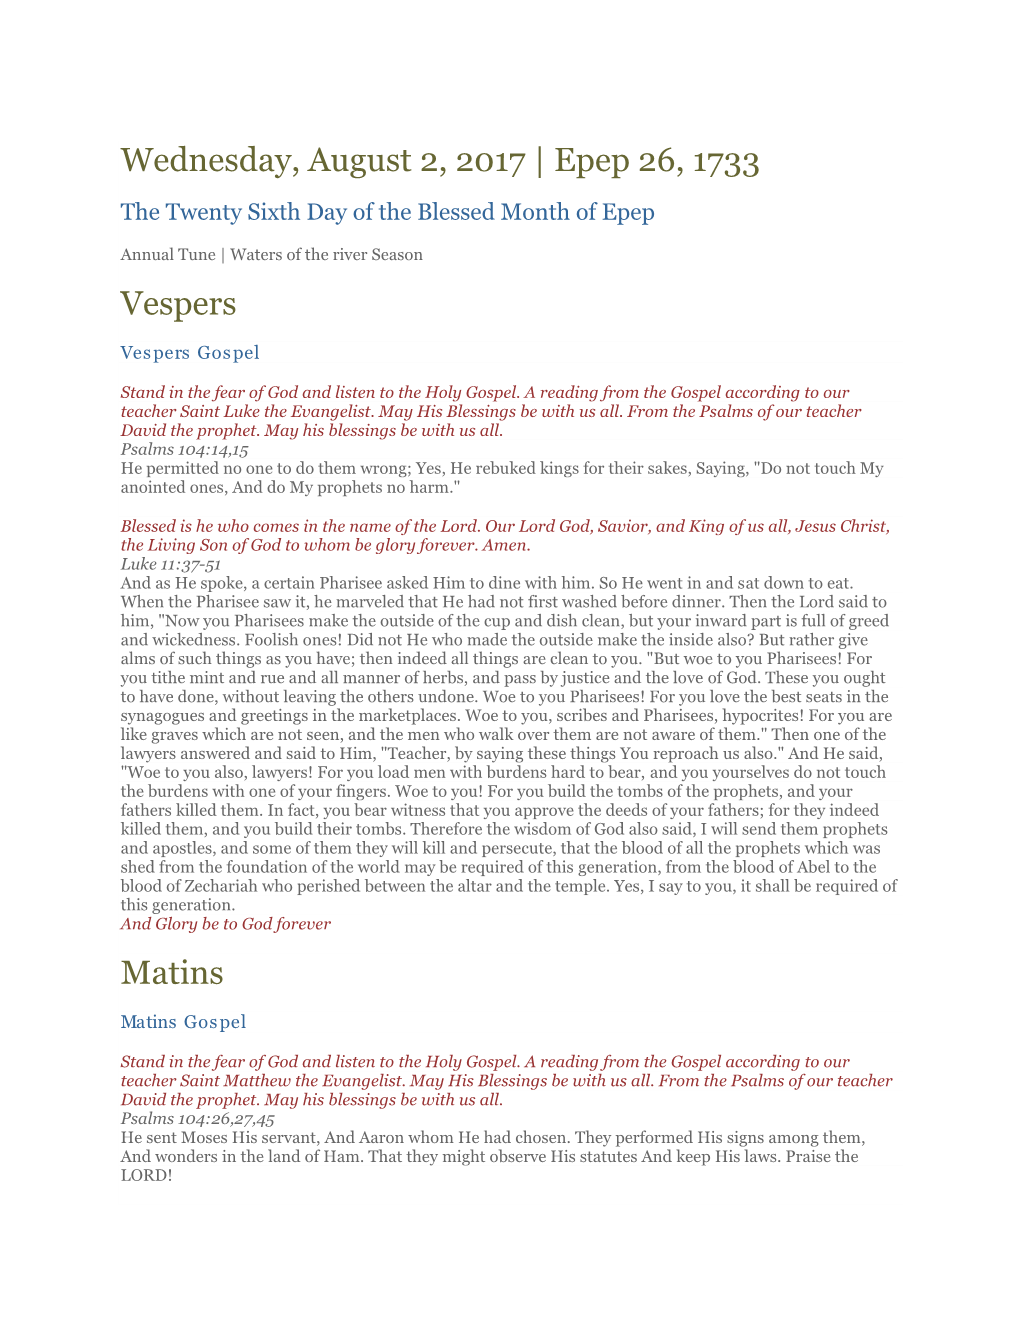 Wednesday, August 2, 2017 | Epep 26, 1733 Vespers Matins